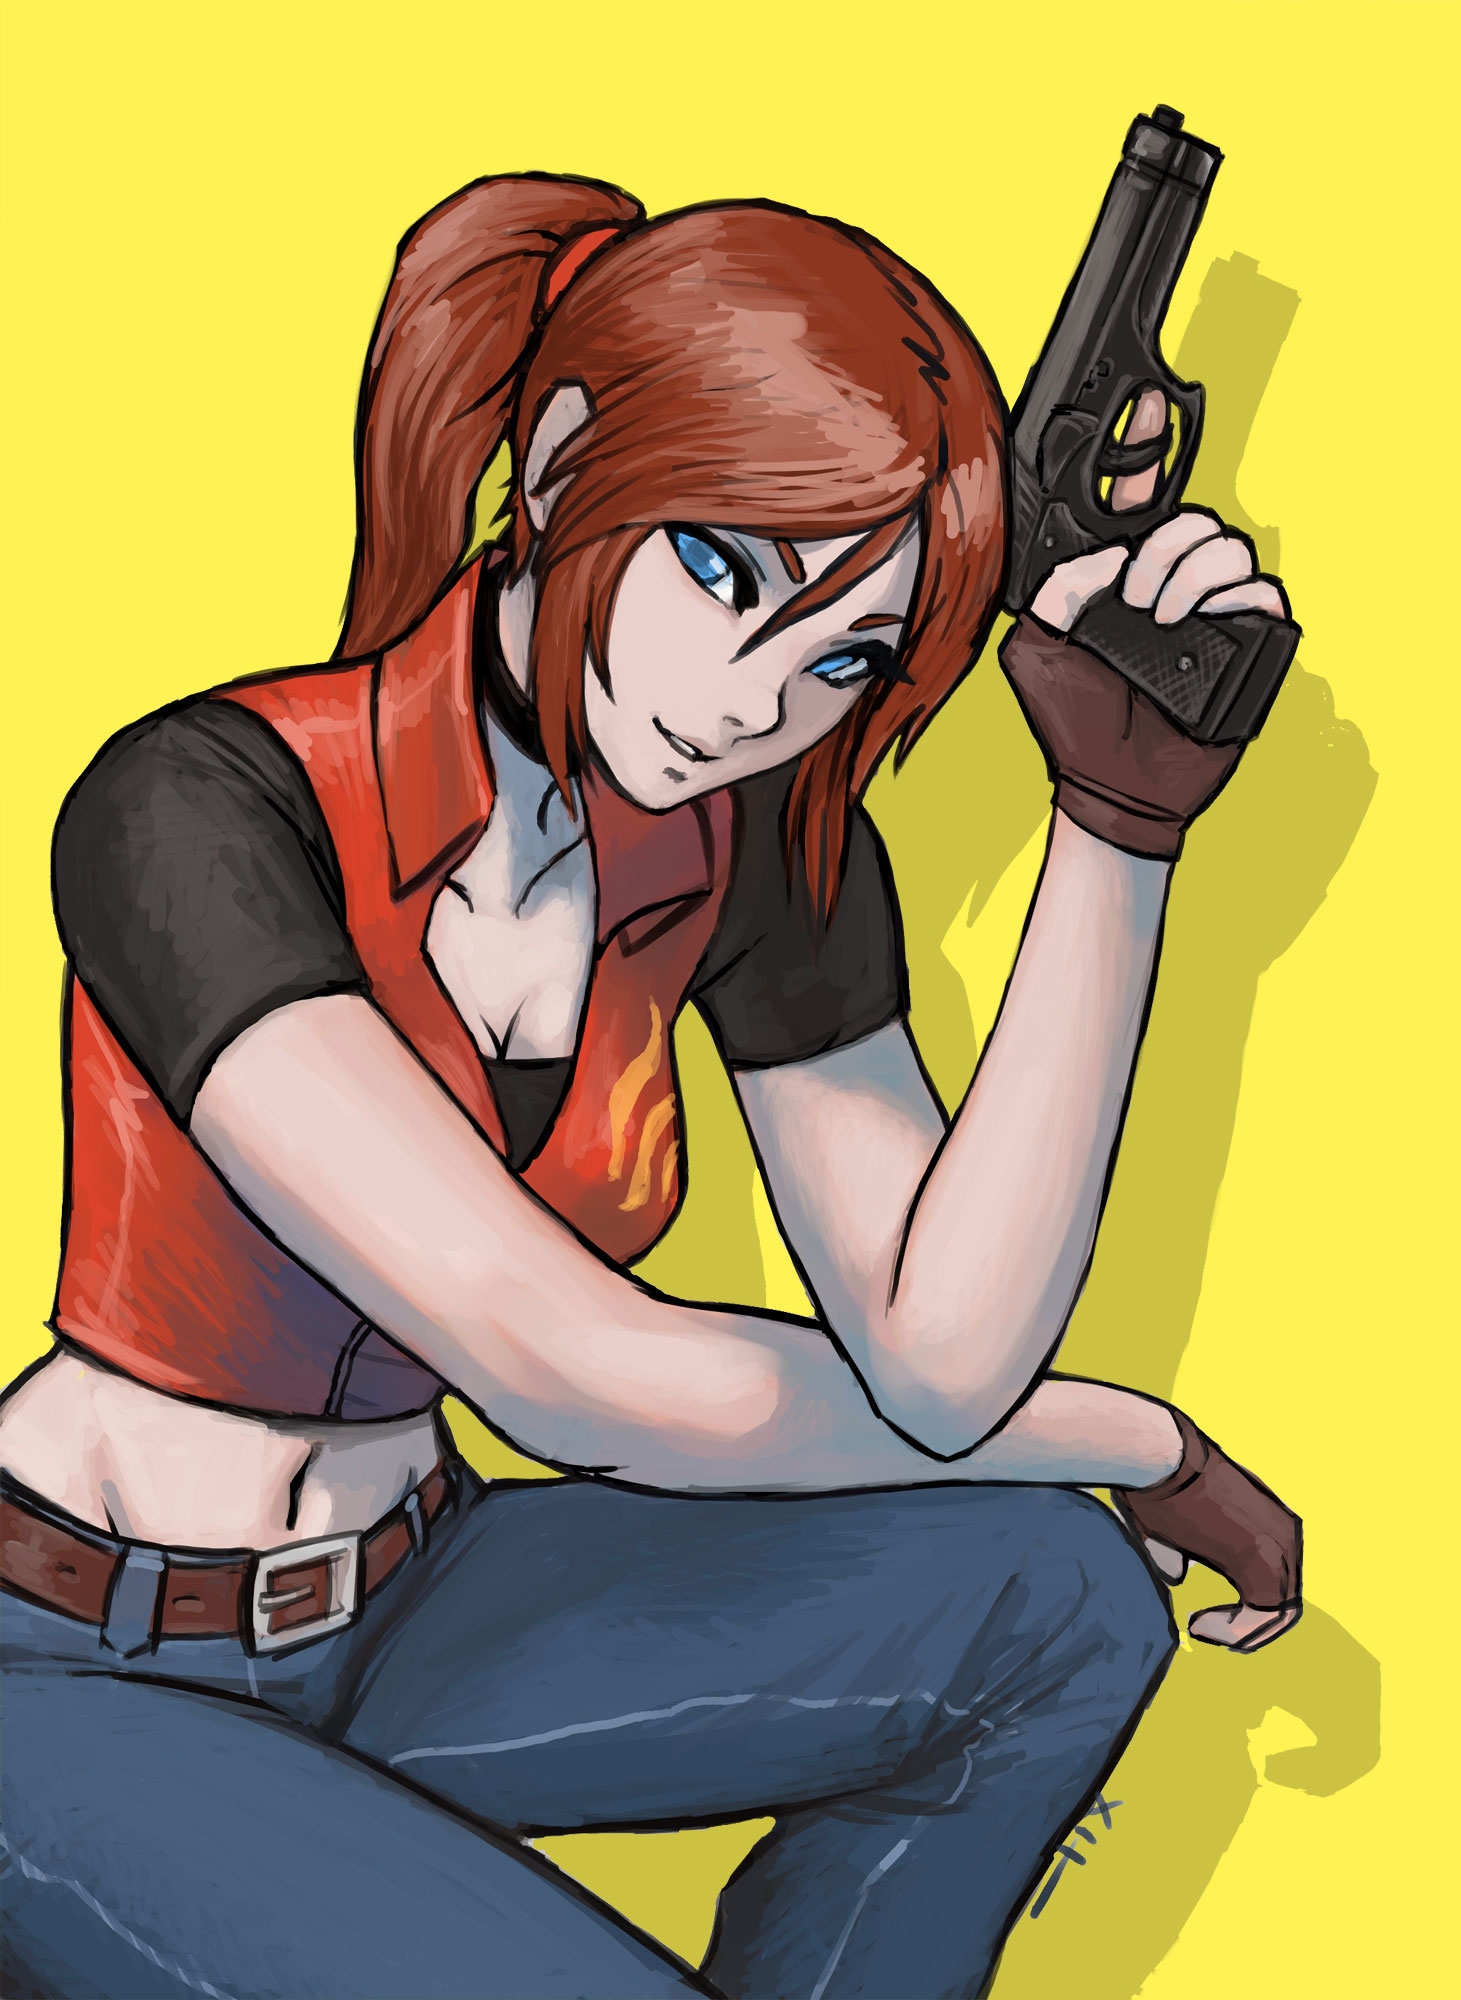 Claire Redfield Resident Evil CV